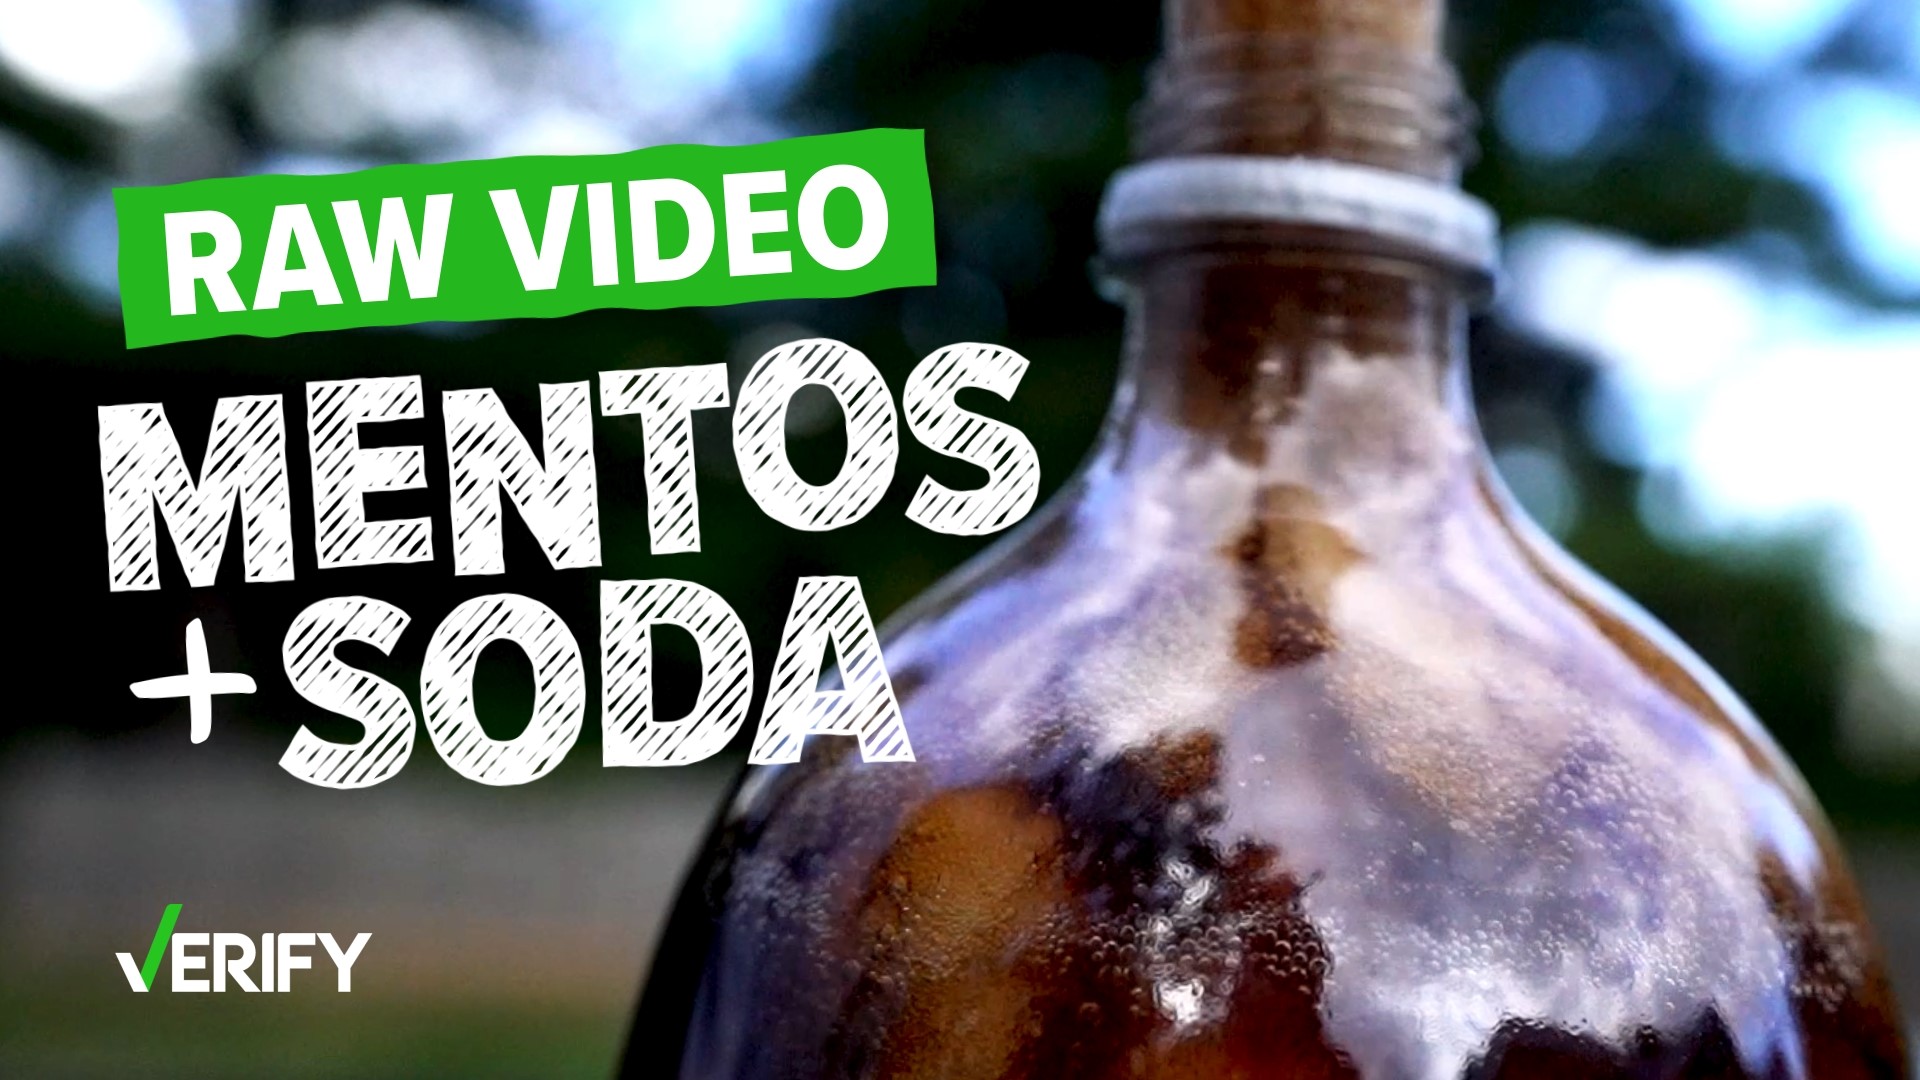 Ariane Datil tests whether putting Mentos in any soda causes it to explode.